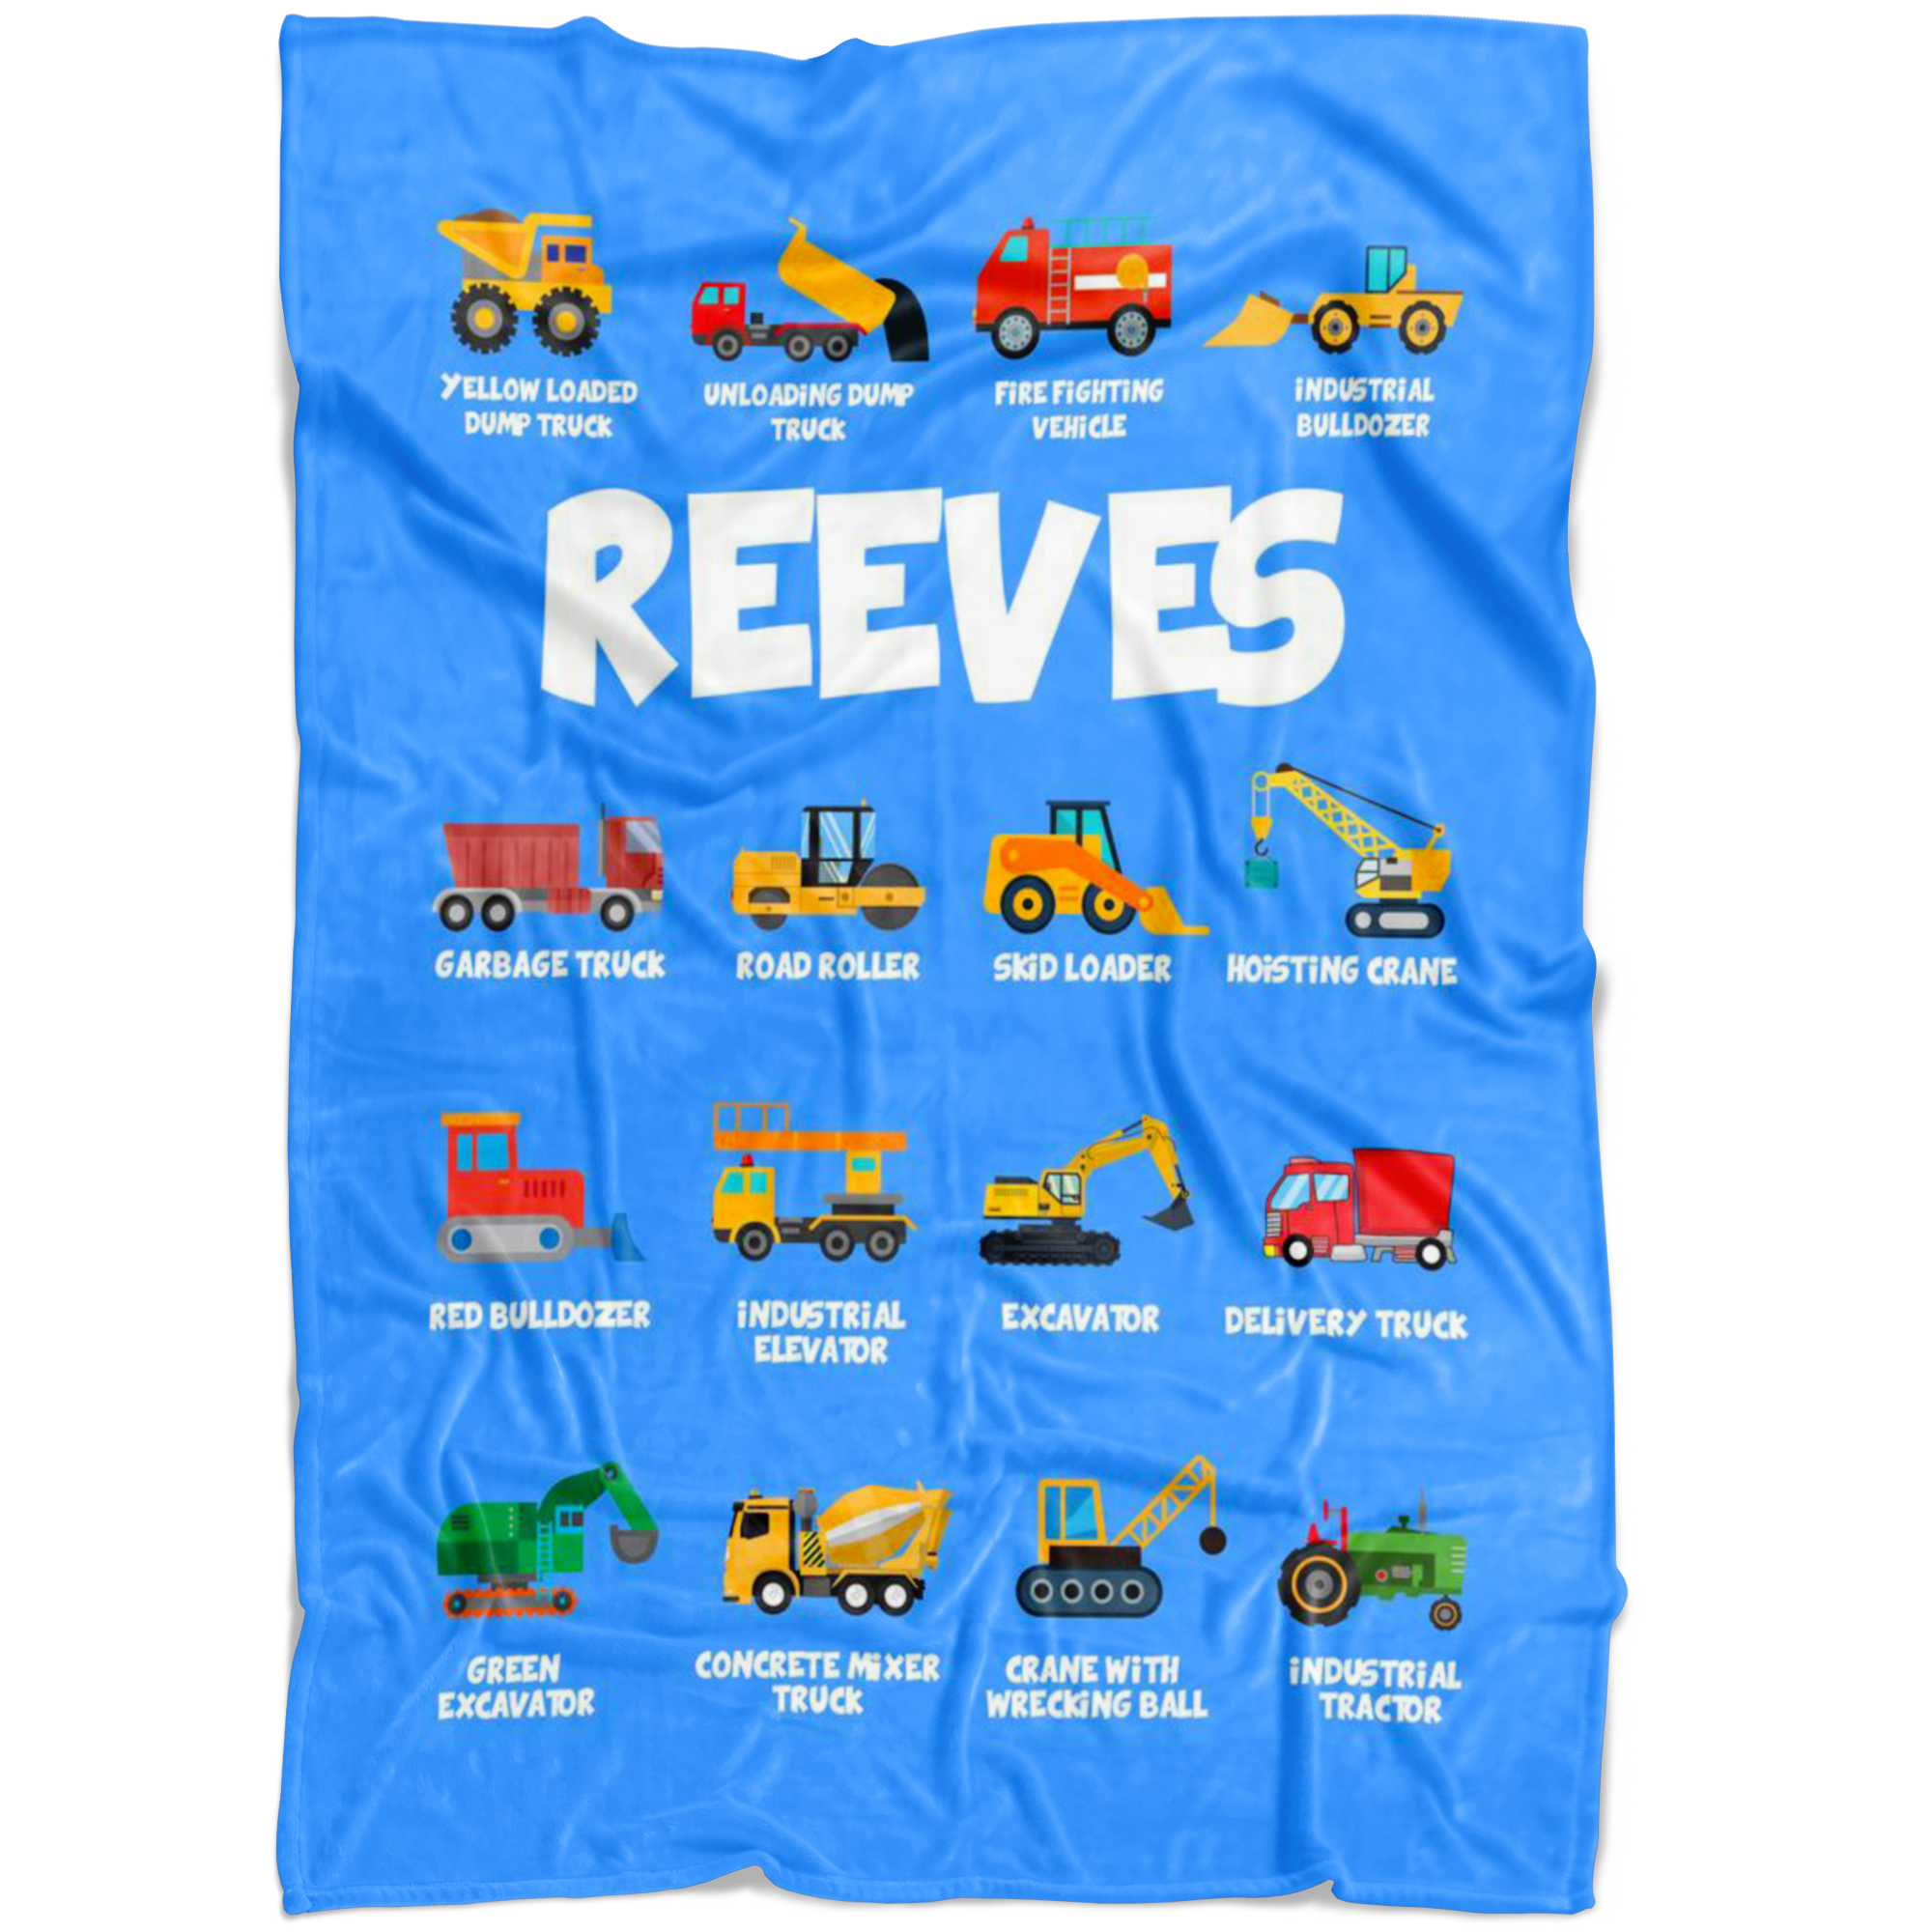 Reeves Construction Blanket Blue